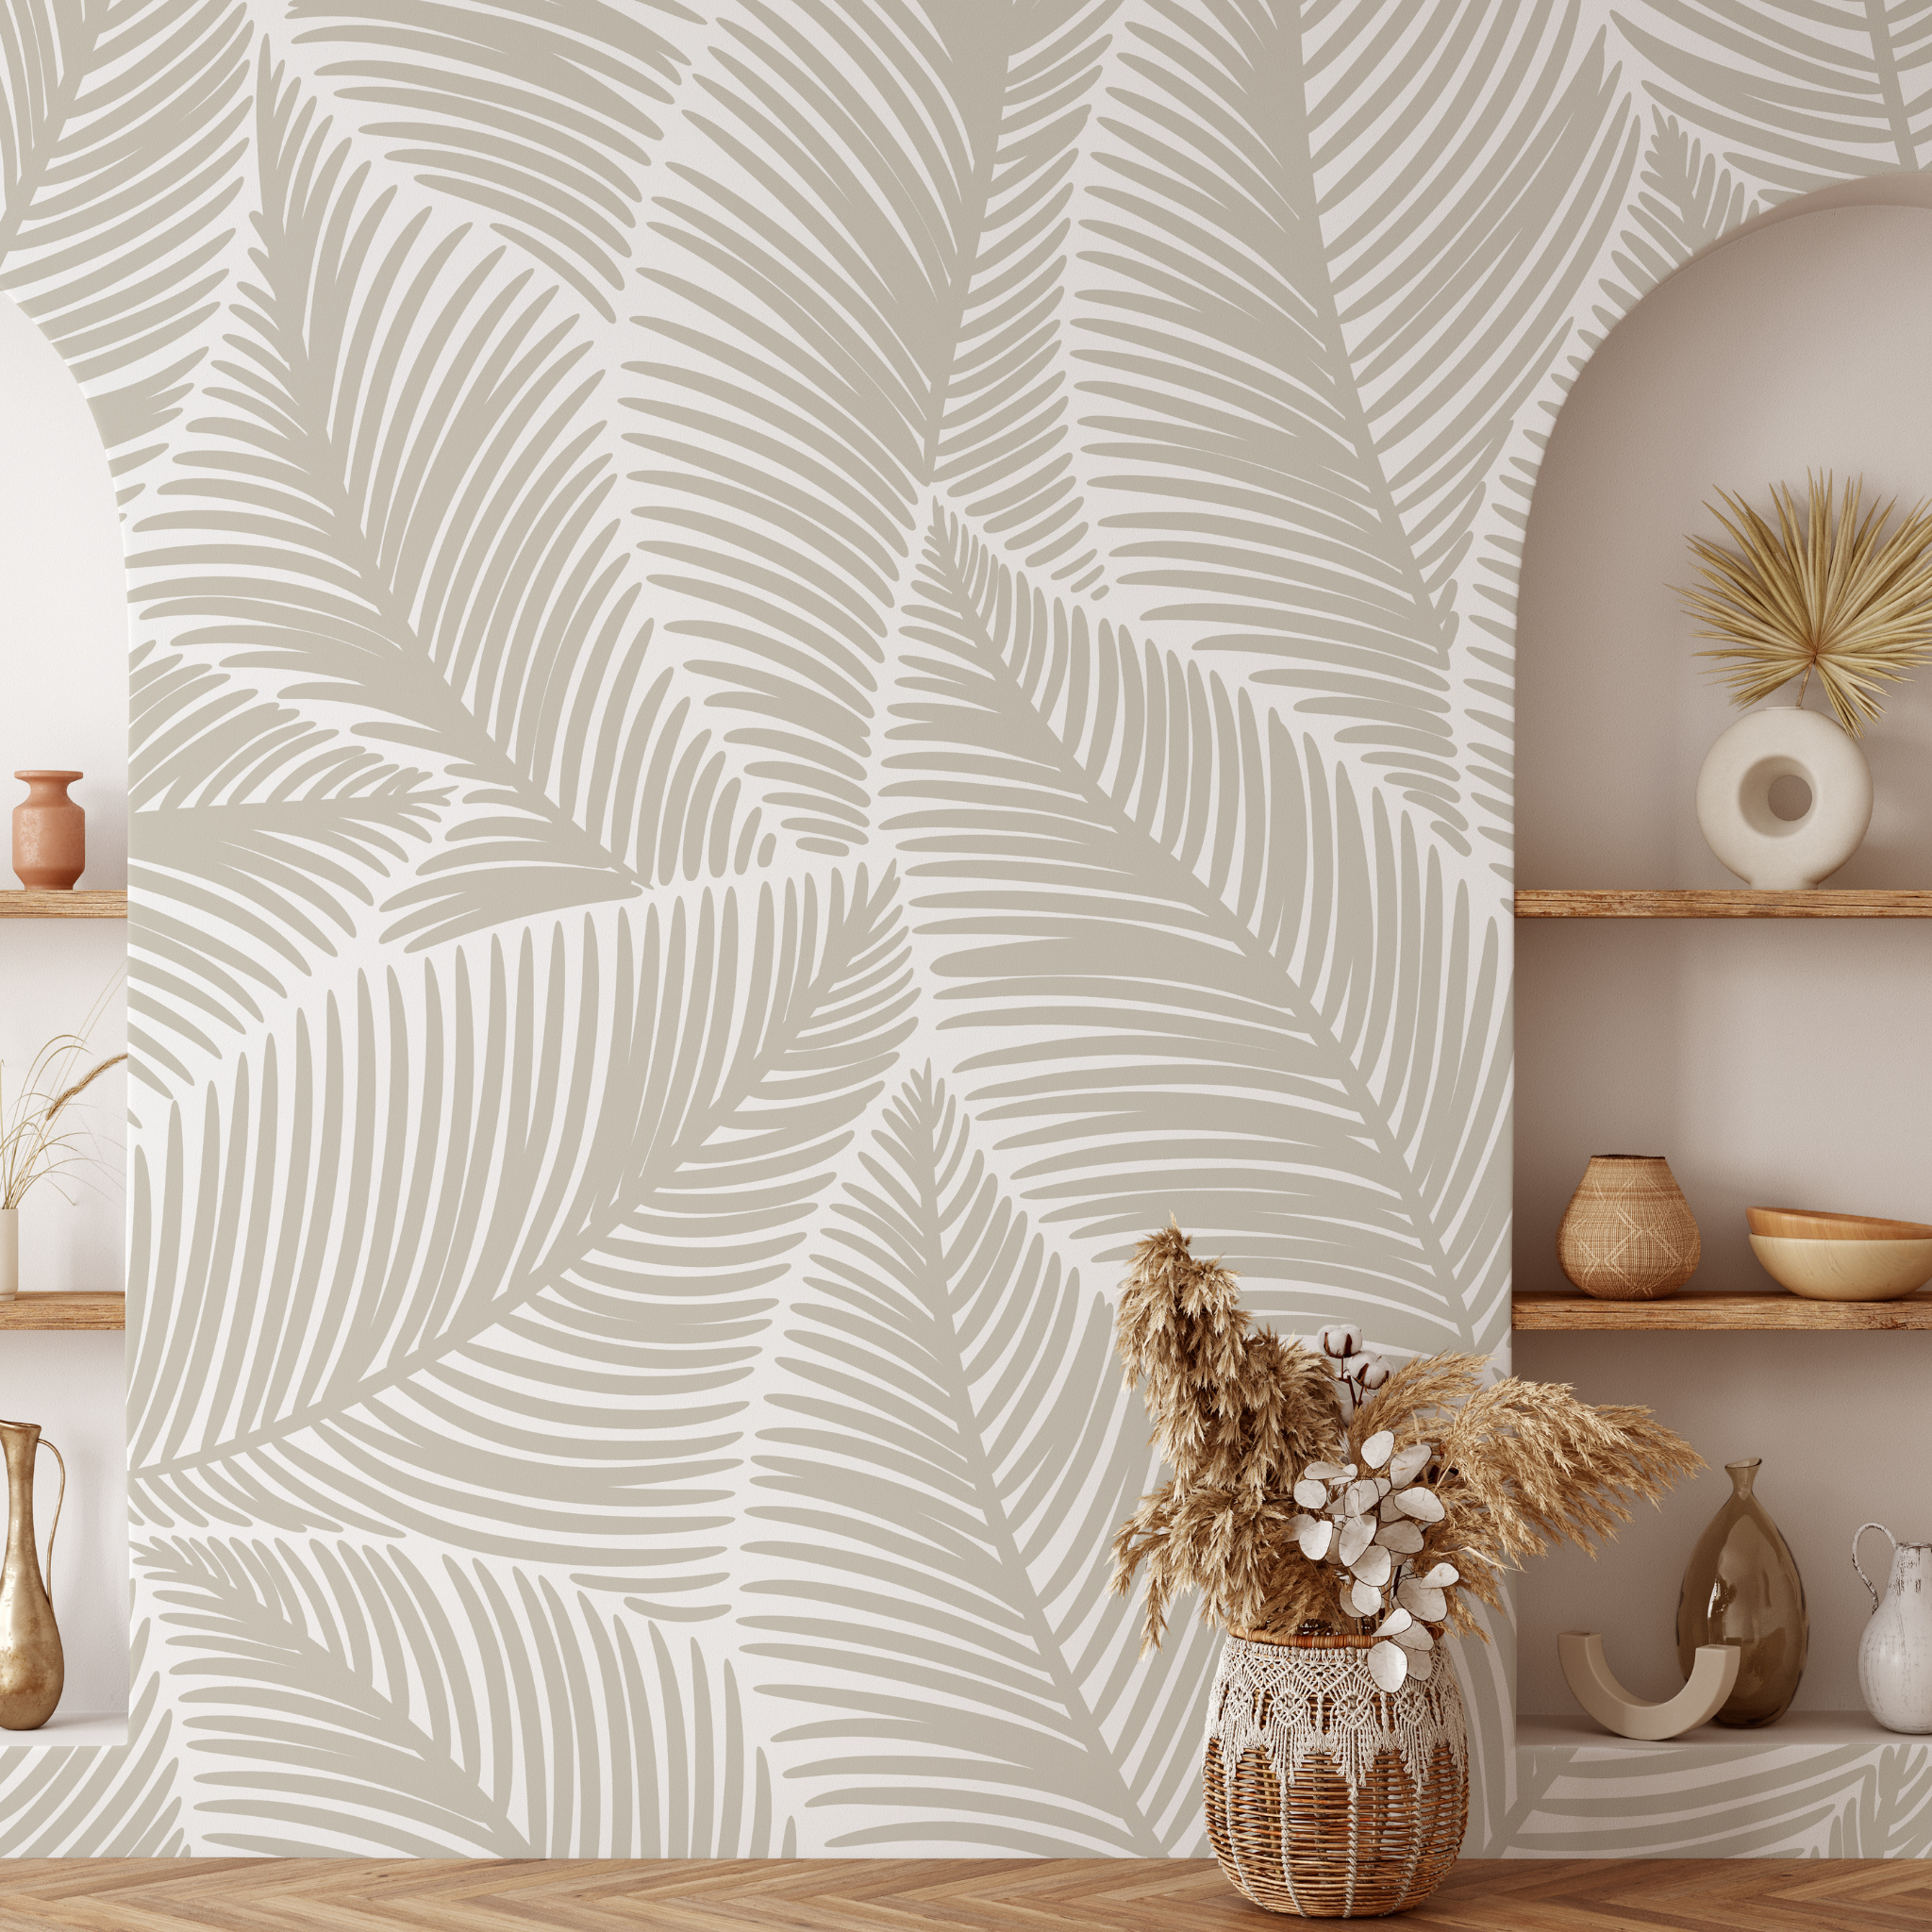 "Wall Blush Ohana Wallpaper in modern living room with stylish neutral-toned leaf design."